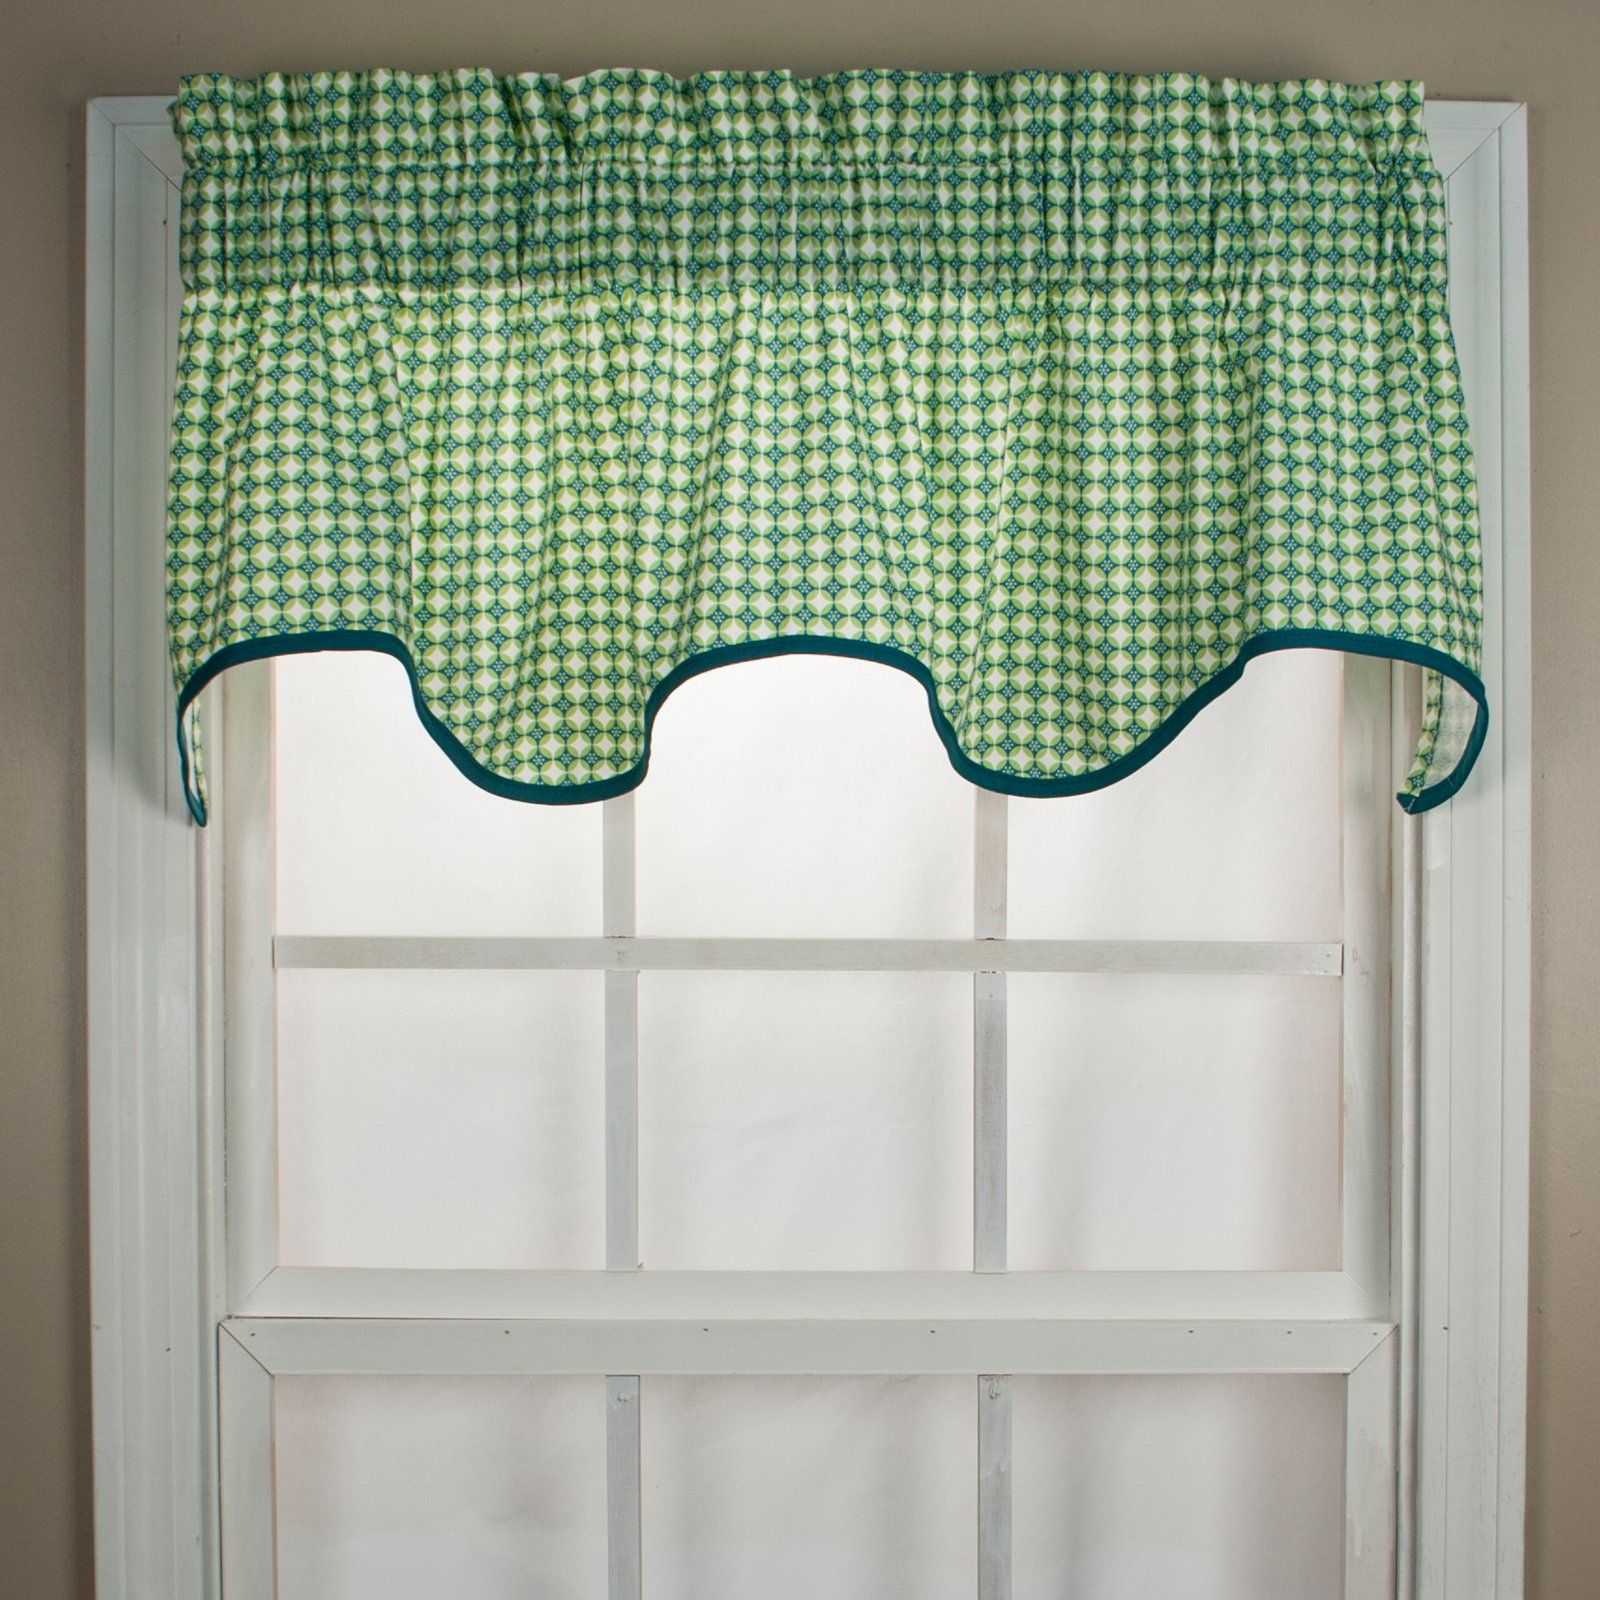 Ellis Curtain Strobe Wave Valance Seaspray In 2019 With Navy Vertical Ruffled Waterfall Valance And Curtain Tiers (View 19 of 20)